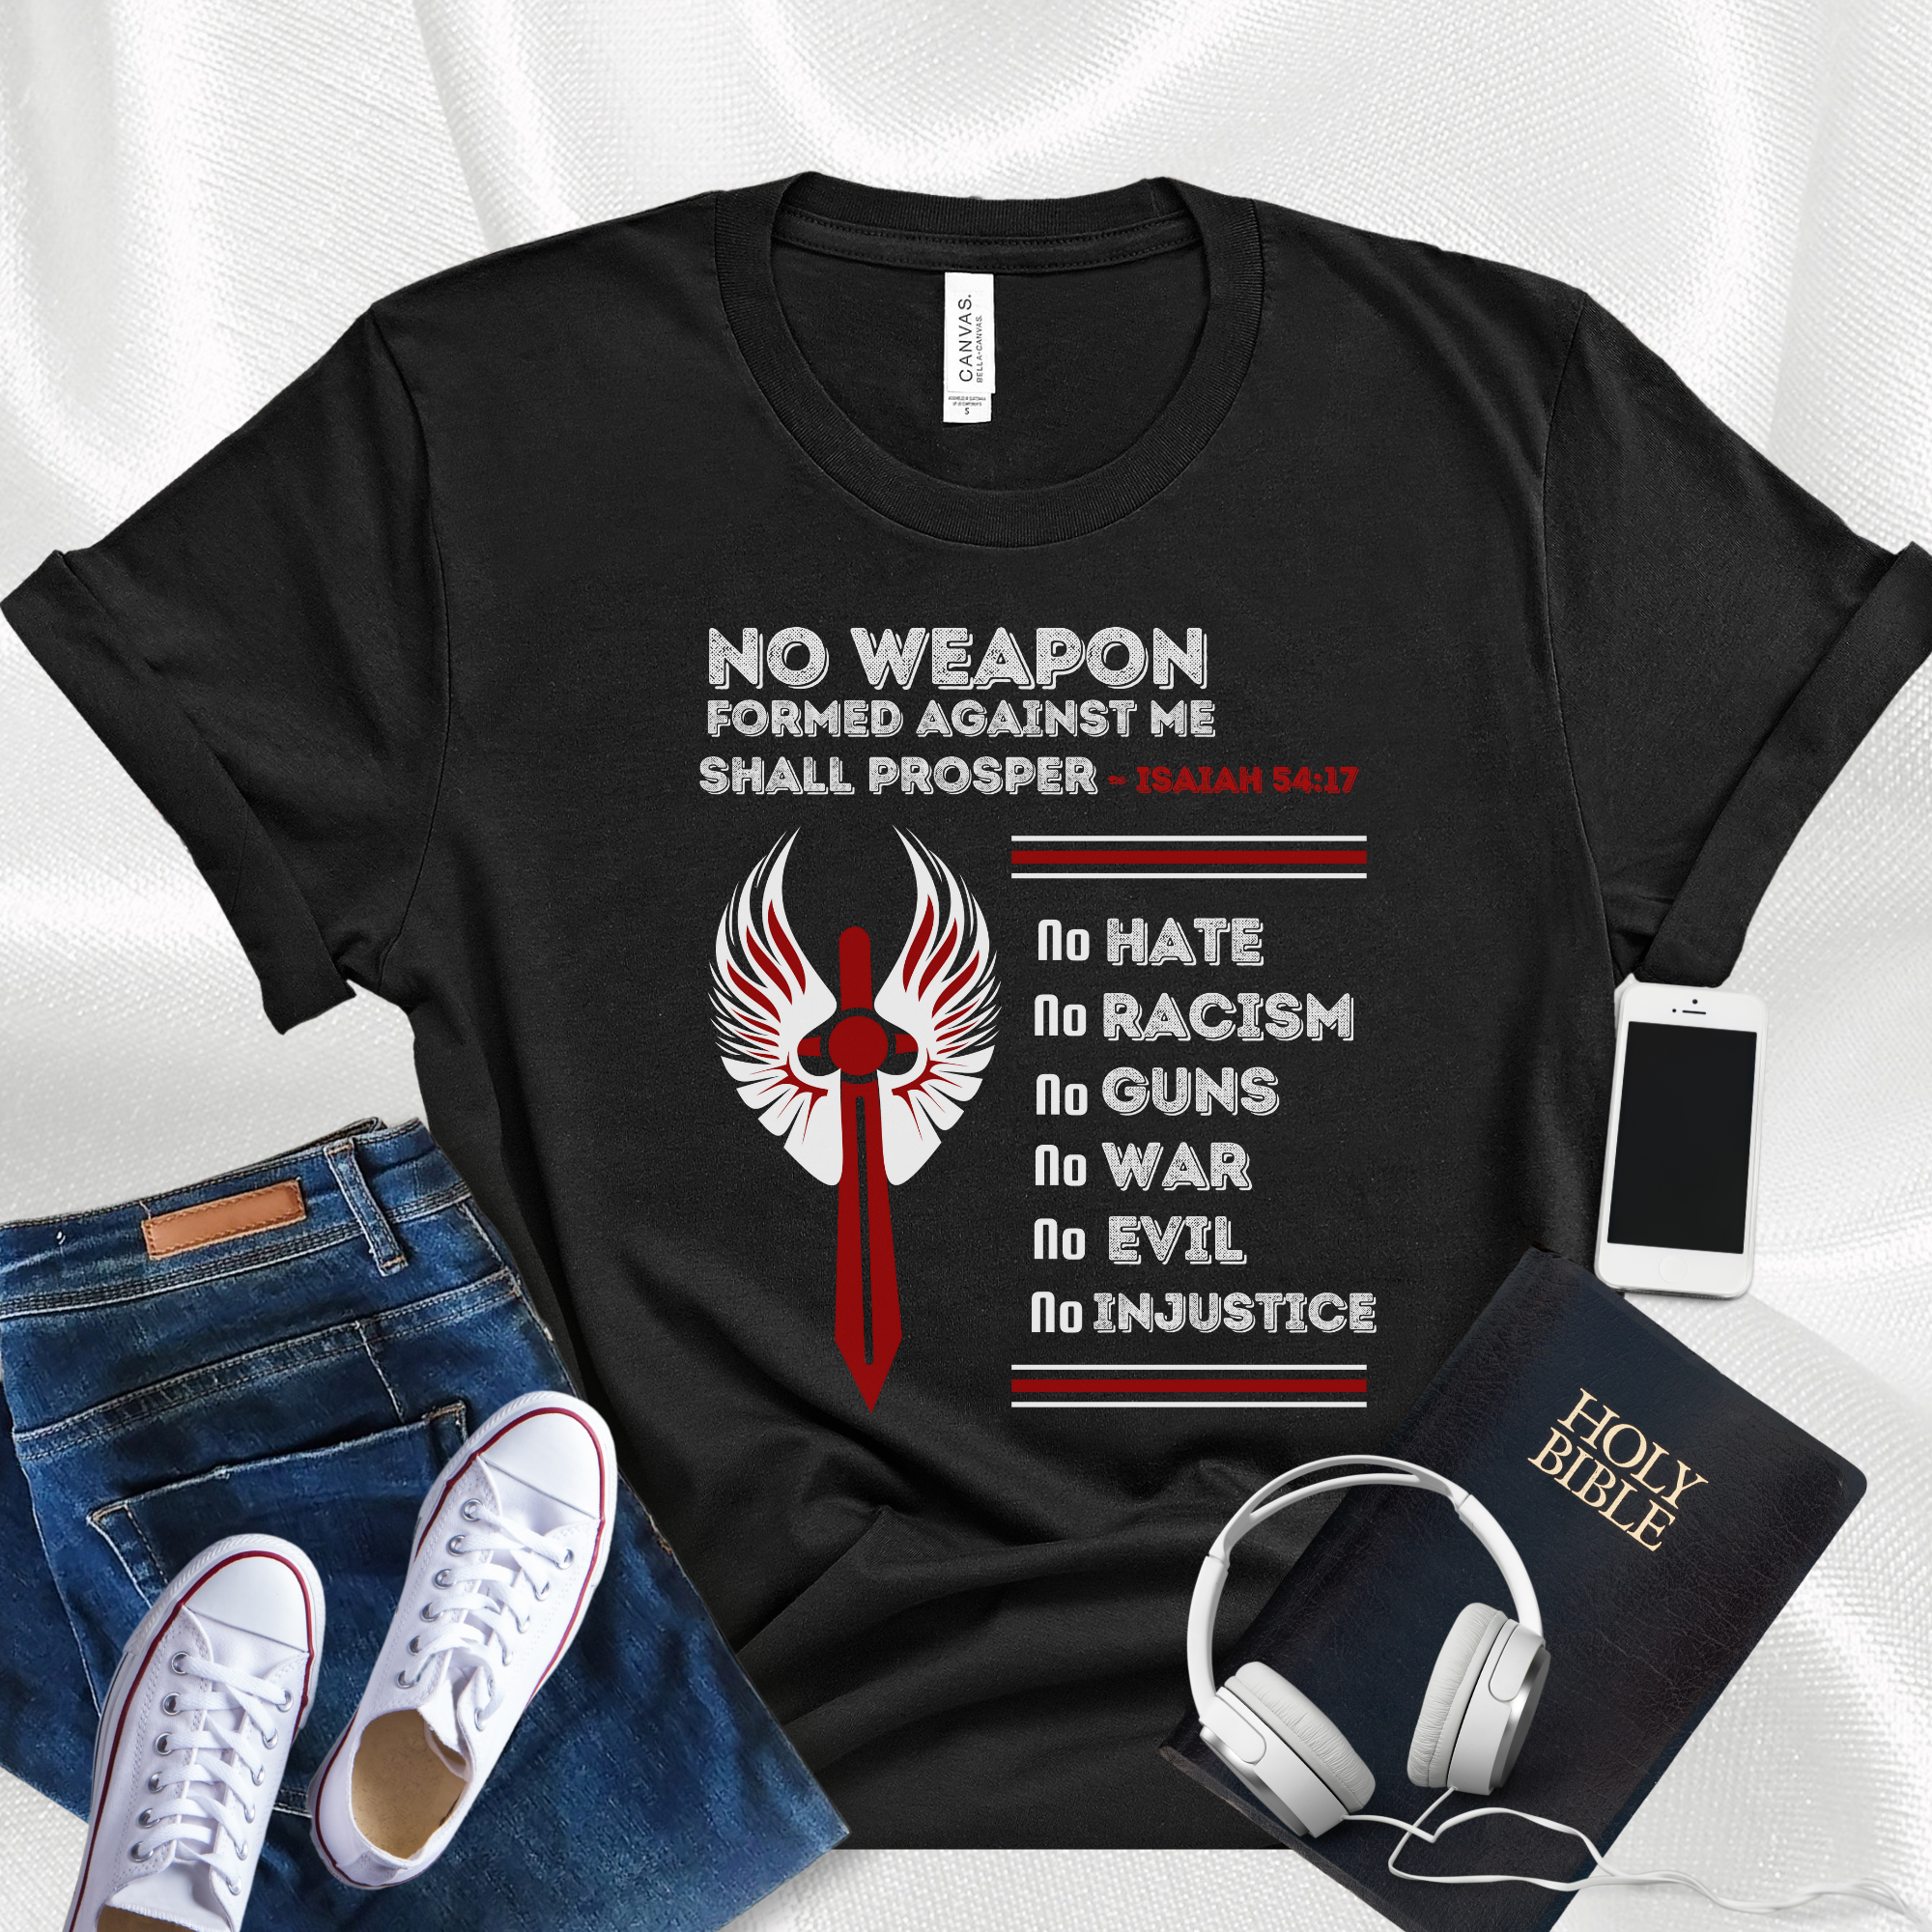 No Weapon Formed Against Me Bible Verse Tee